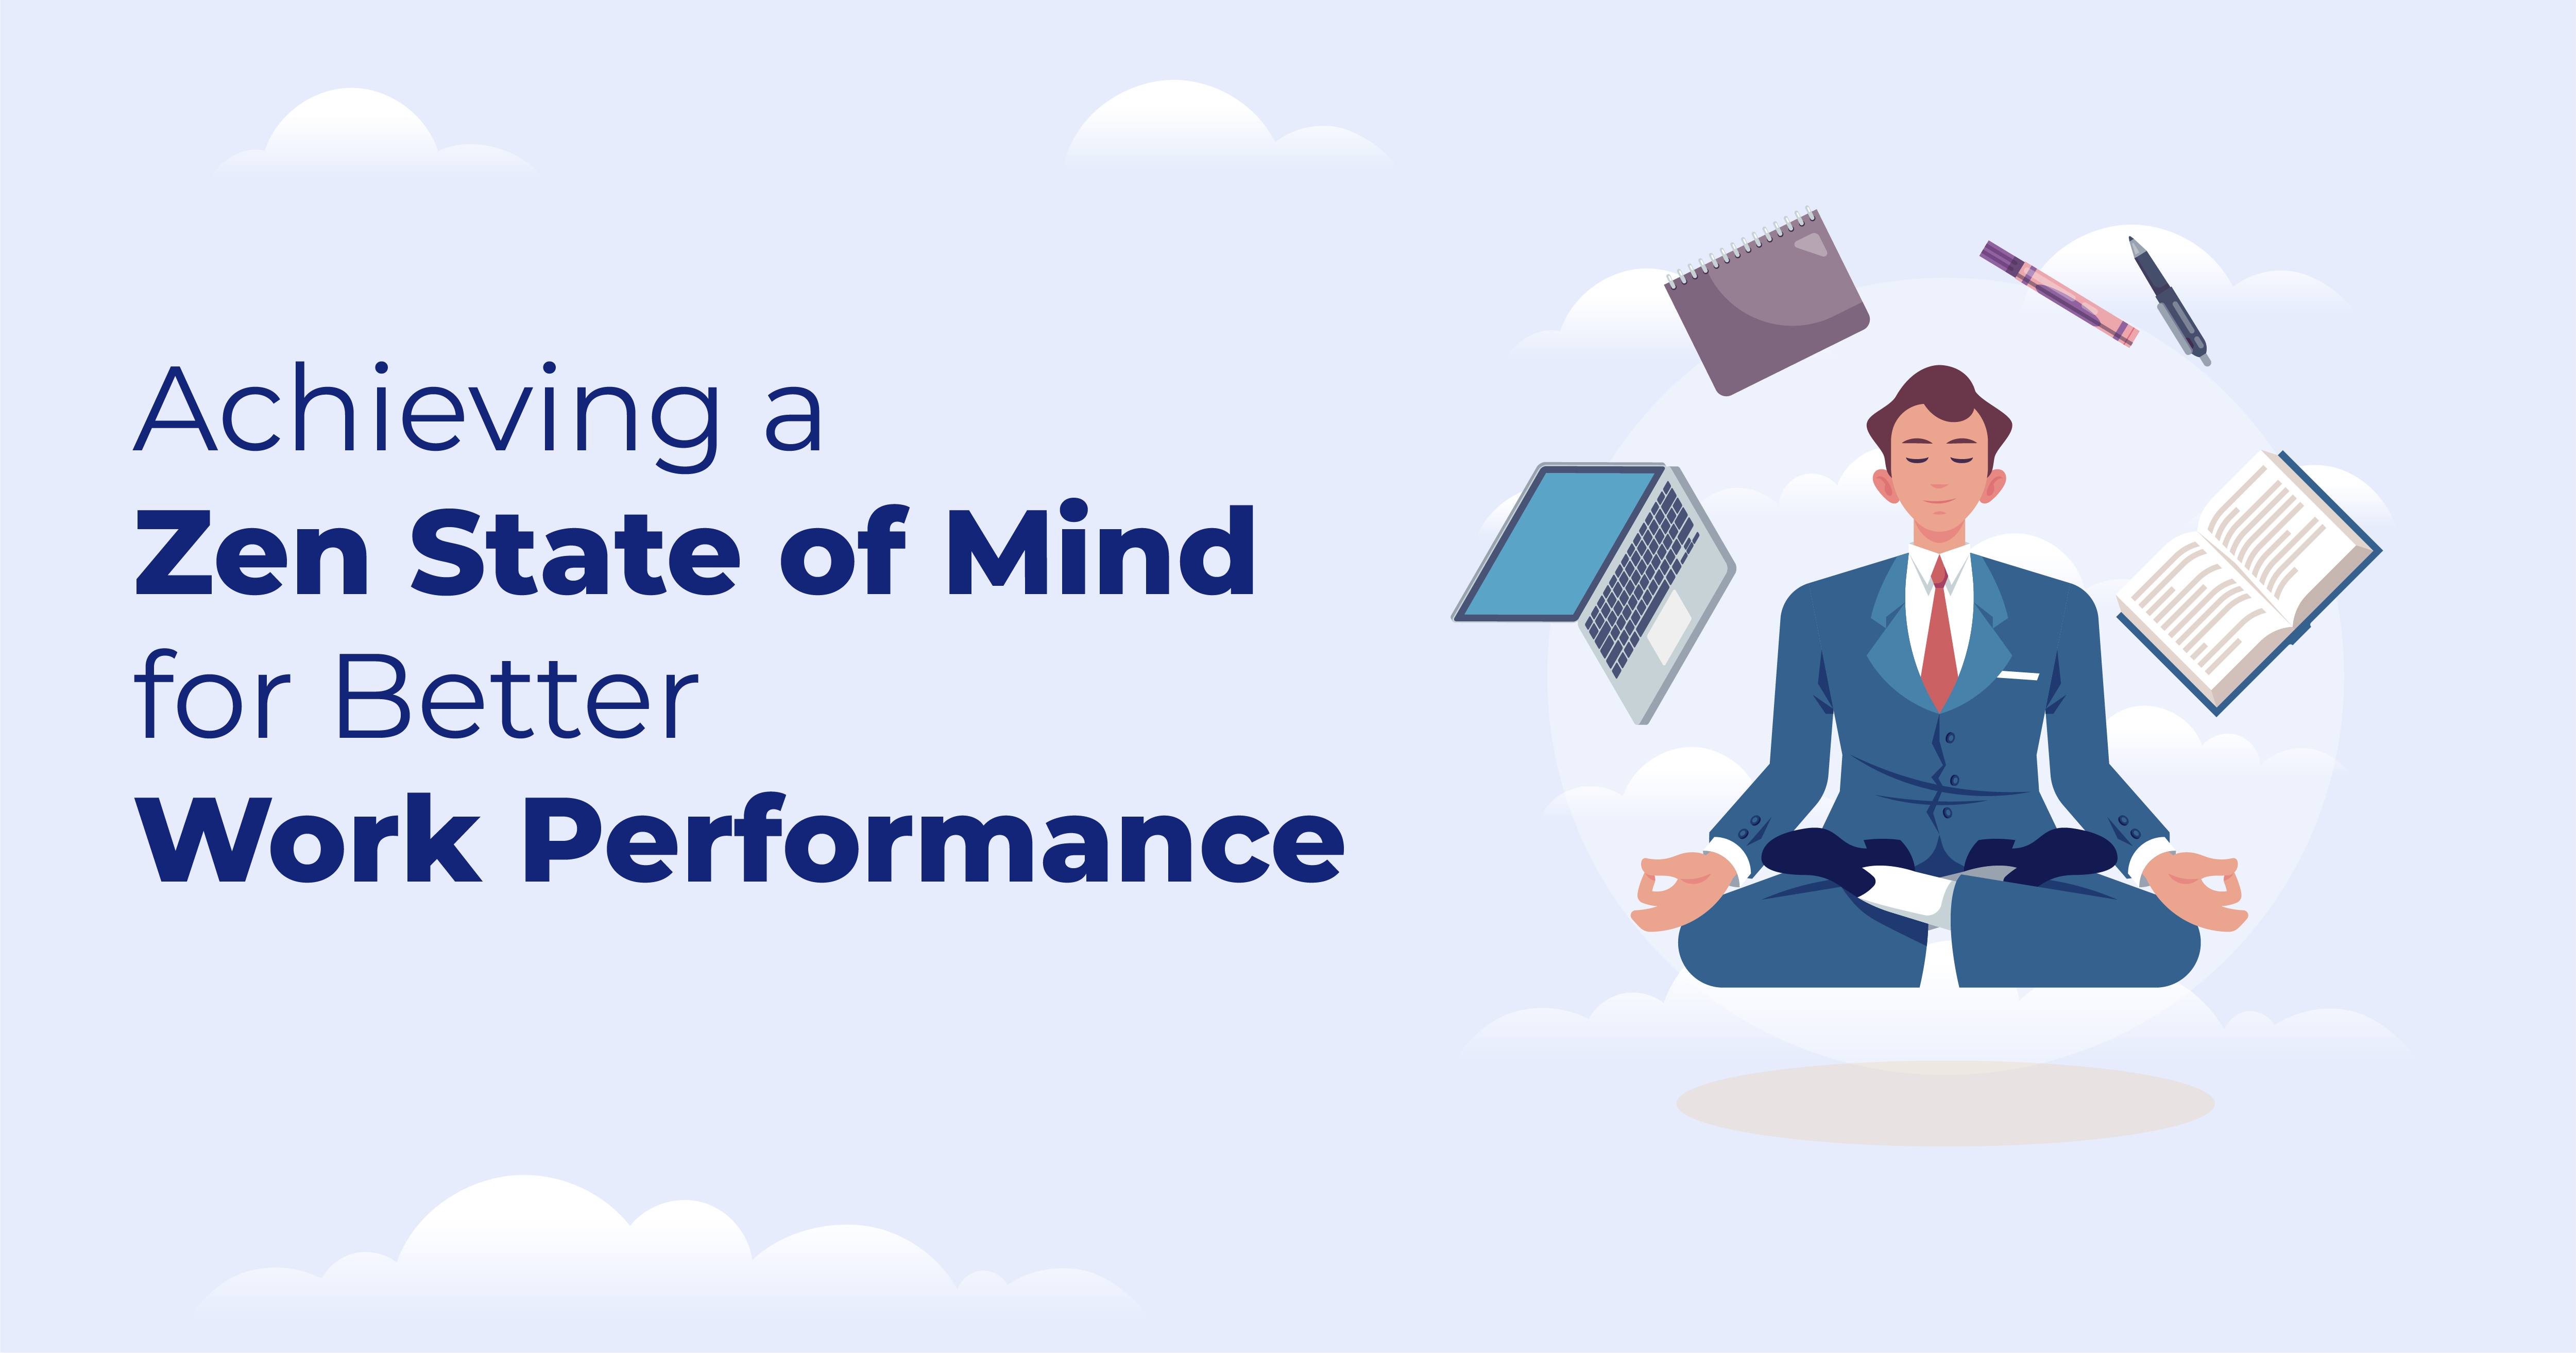 Achieving a Zen State of Mind for Better Work Performance